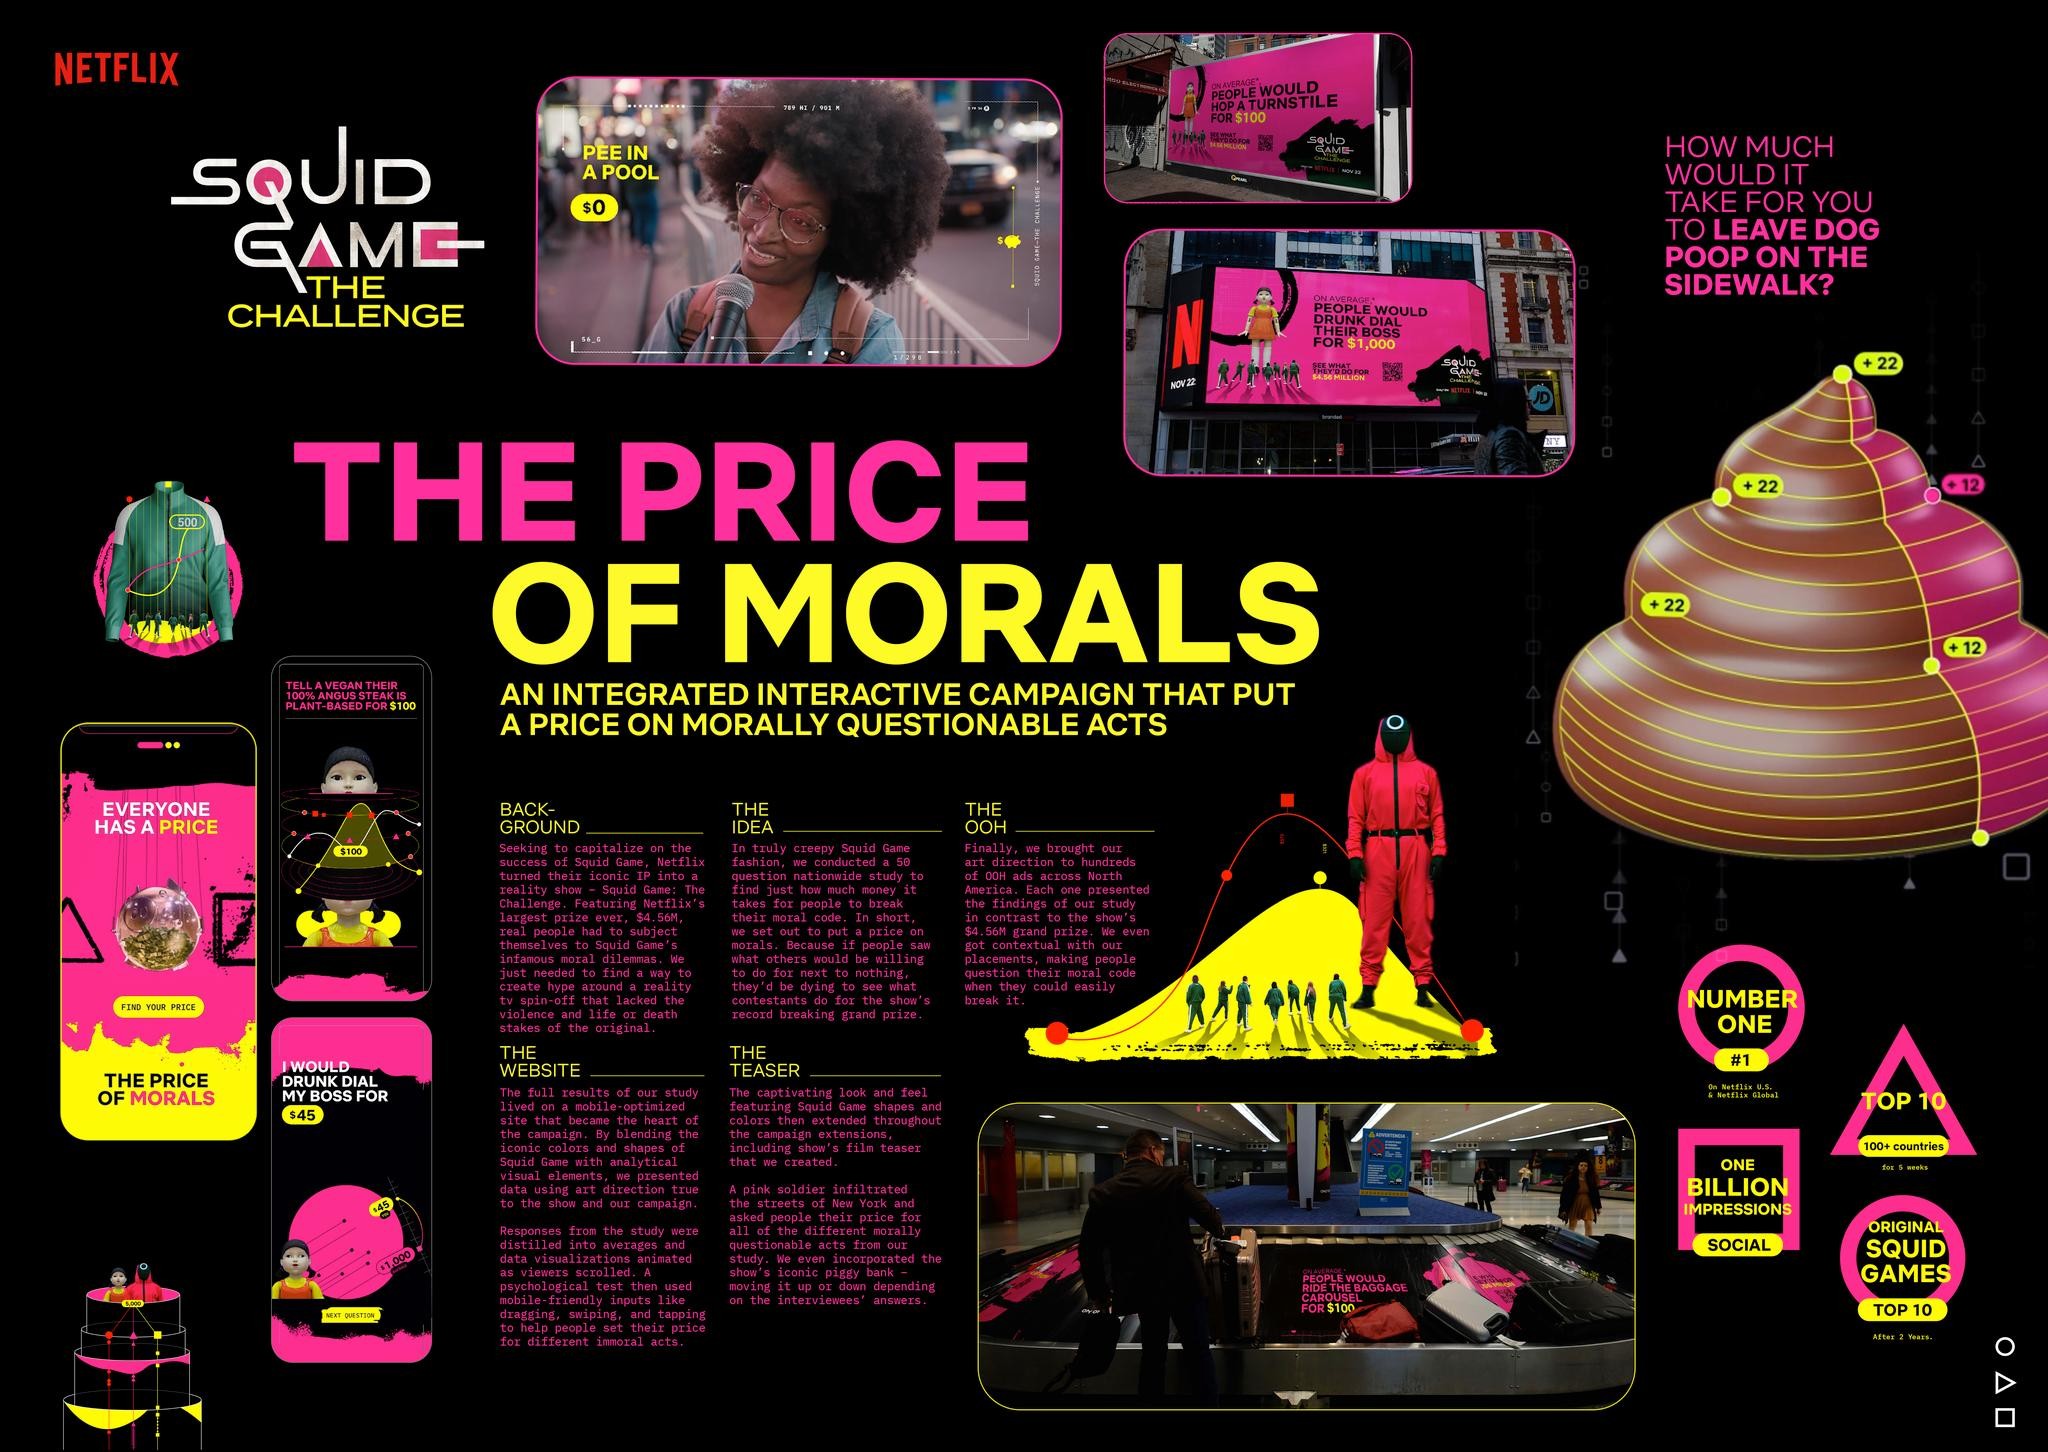 The Price of Morals Campaign - Squid Game: The Challenge